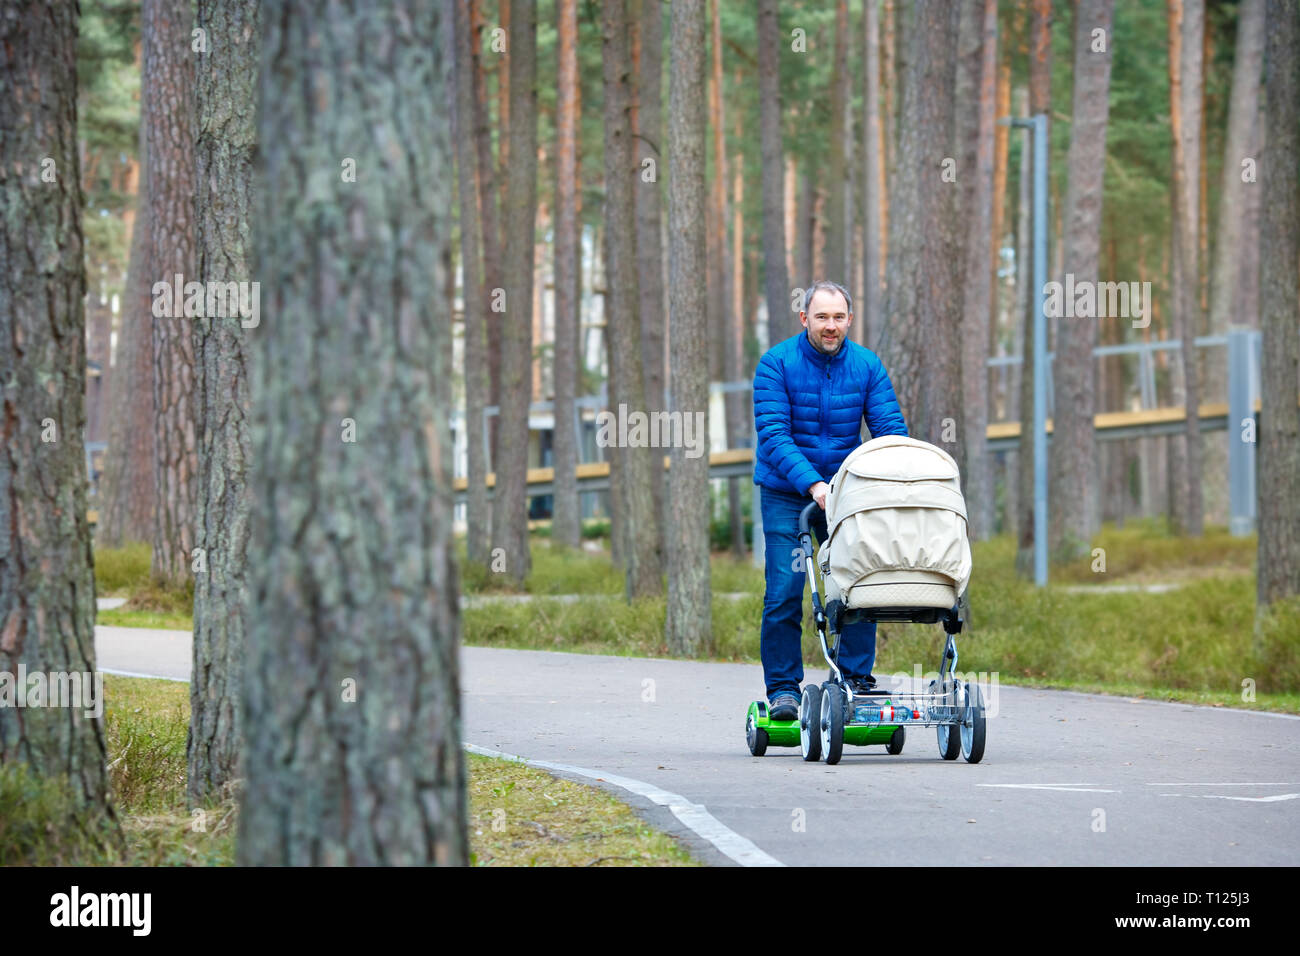 A young father on gyro scooter board with a stroller walks through the autumn park Stock Photo